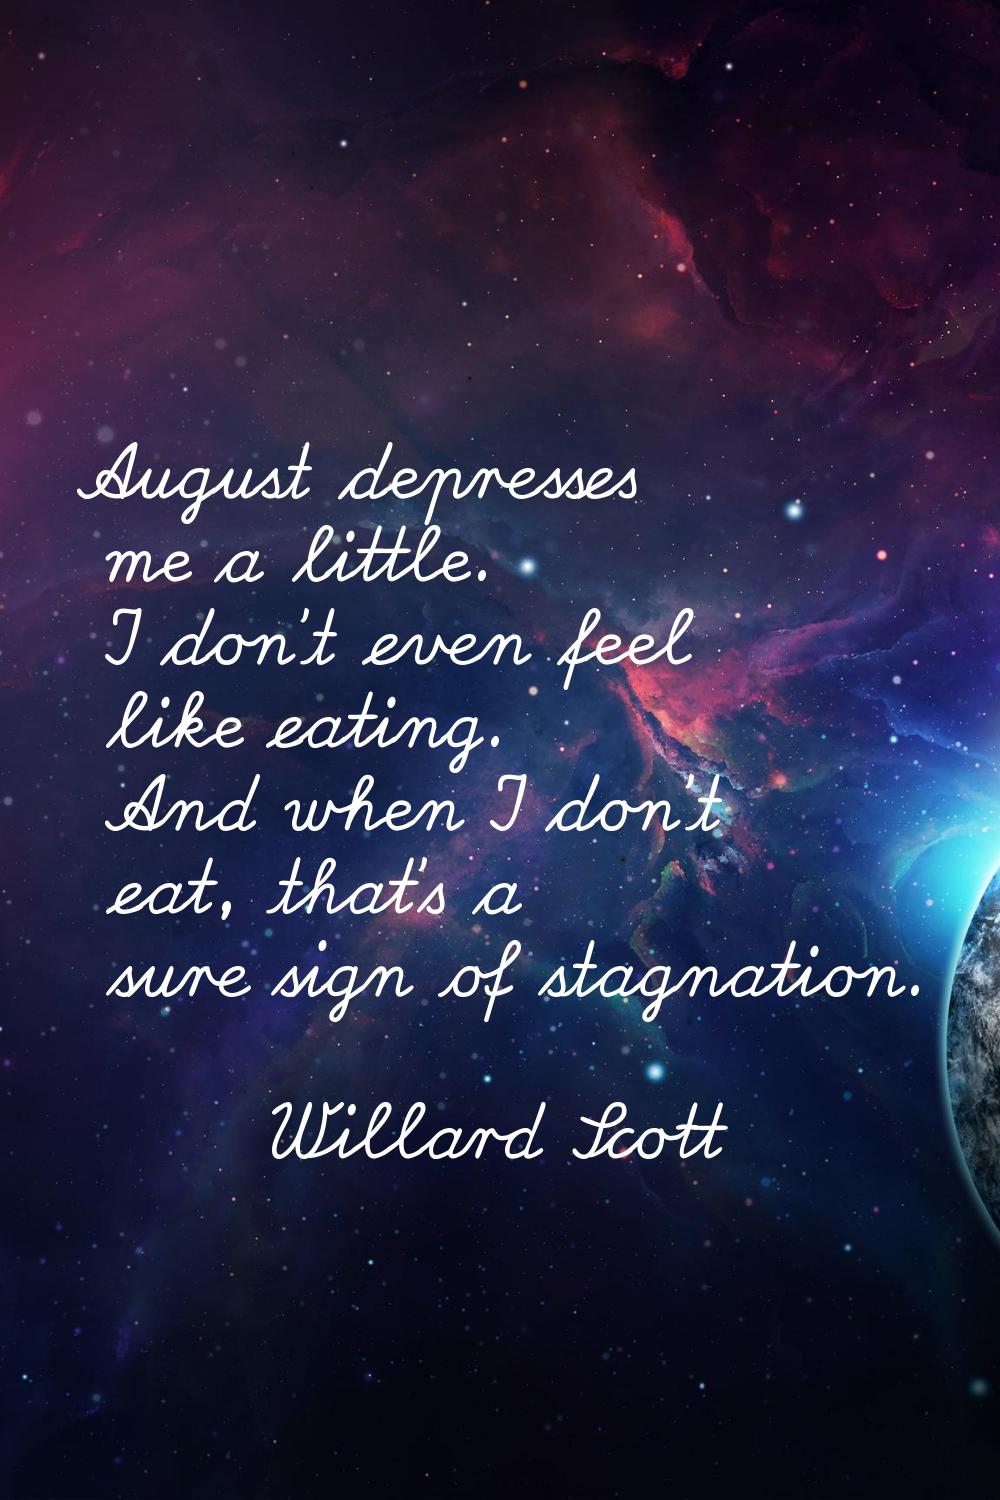 August depresses me a little. I don't even feel like eating. And when I don't eat, that's a sure si